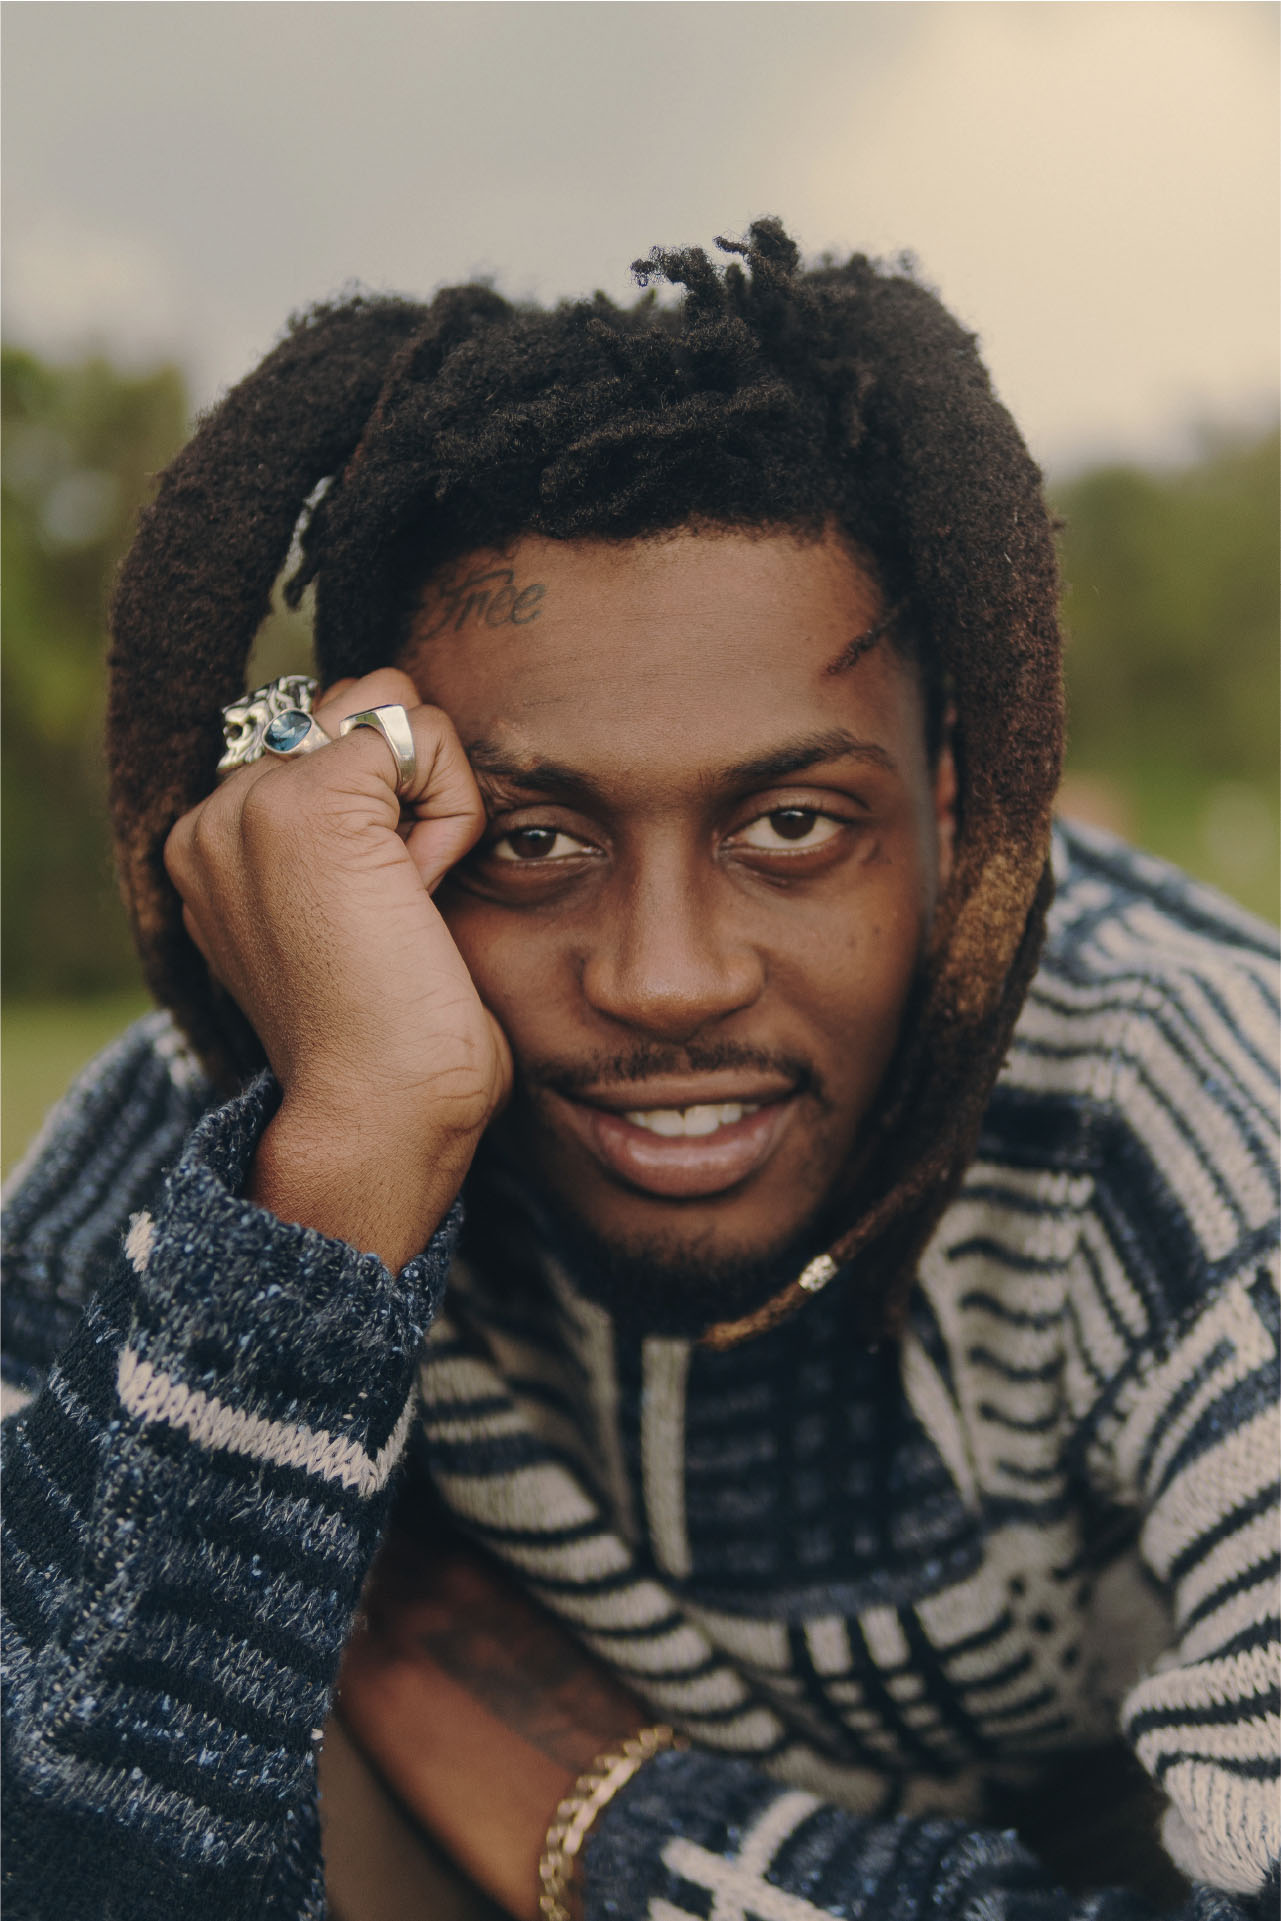 Man posing with a patterned textured blue and white sweater, leaning on his hand with large rings on every finger.